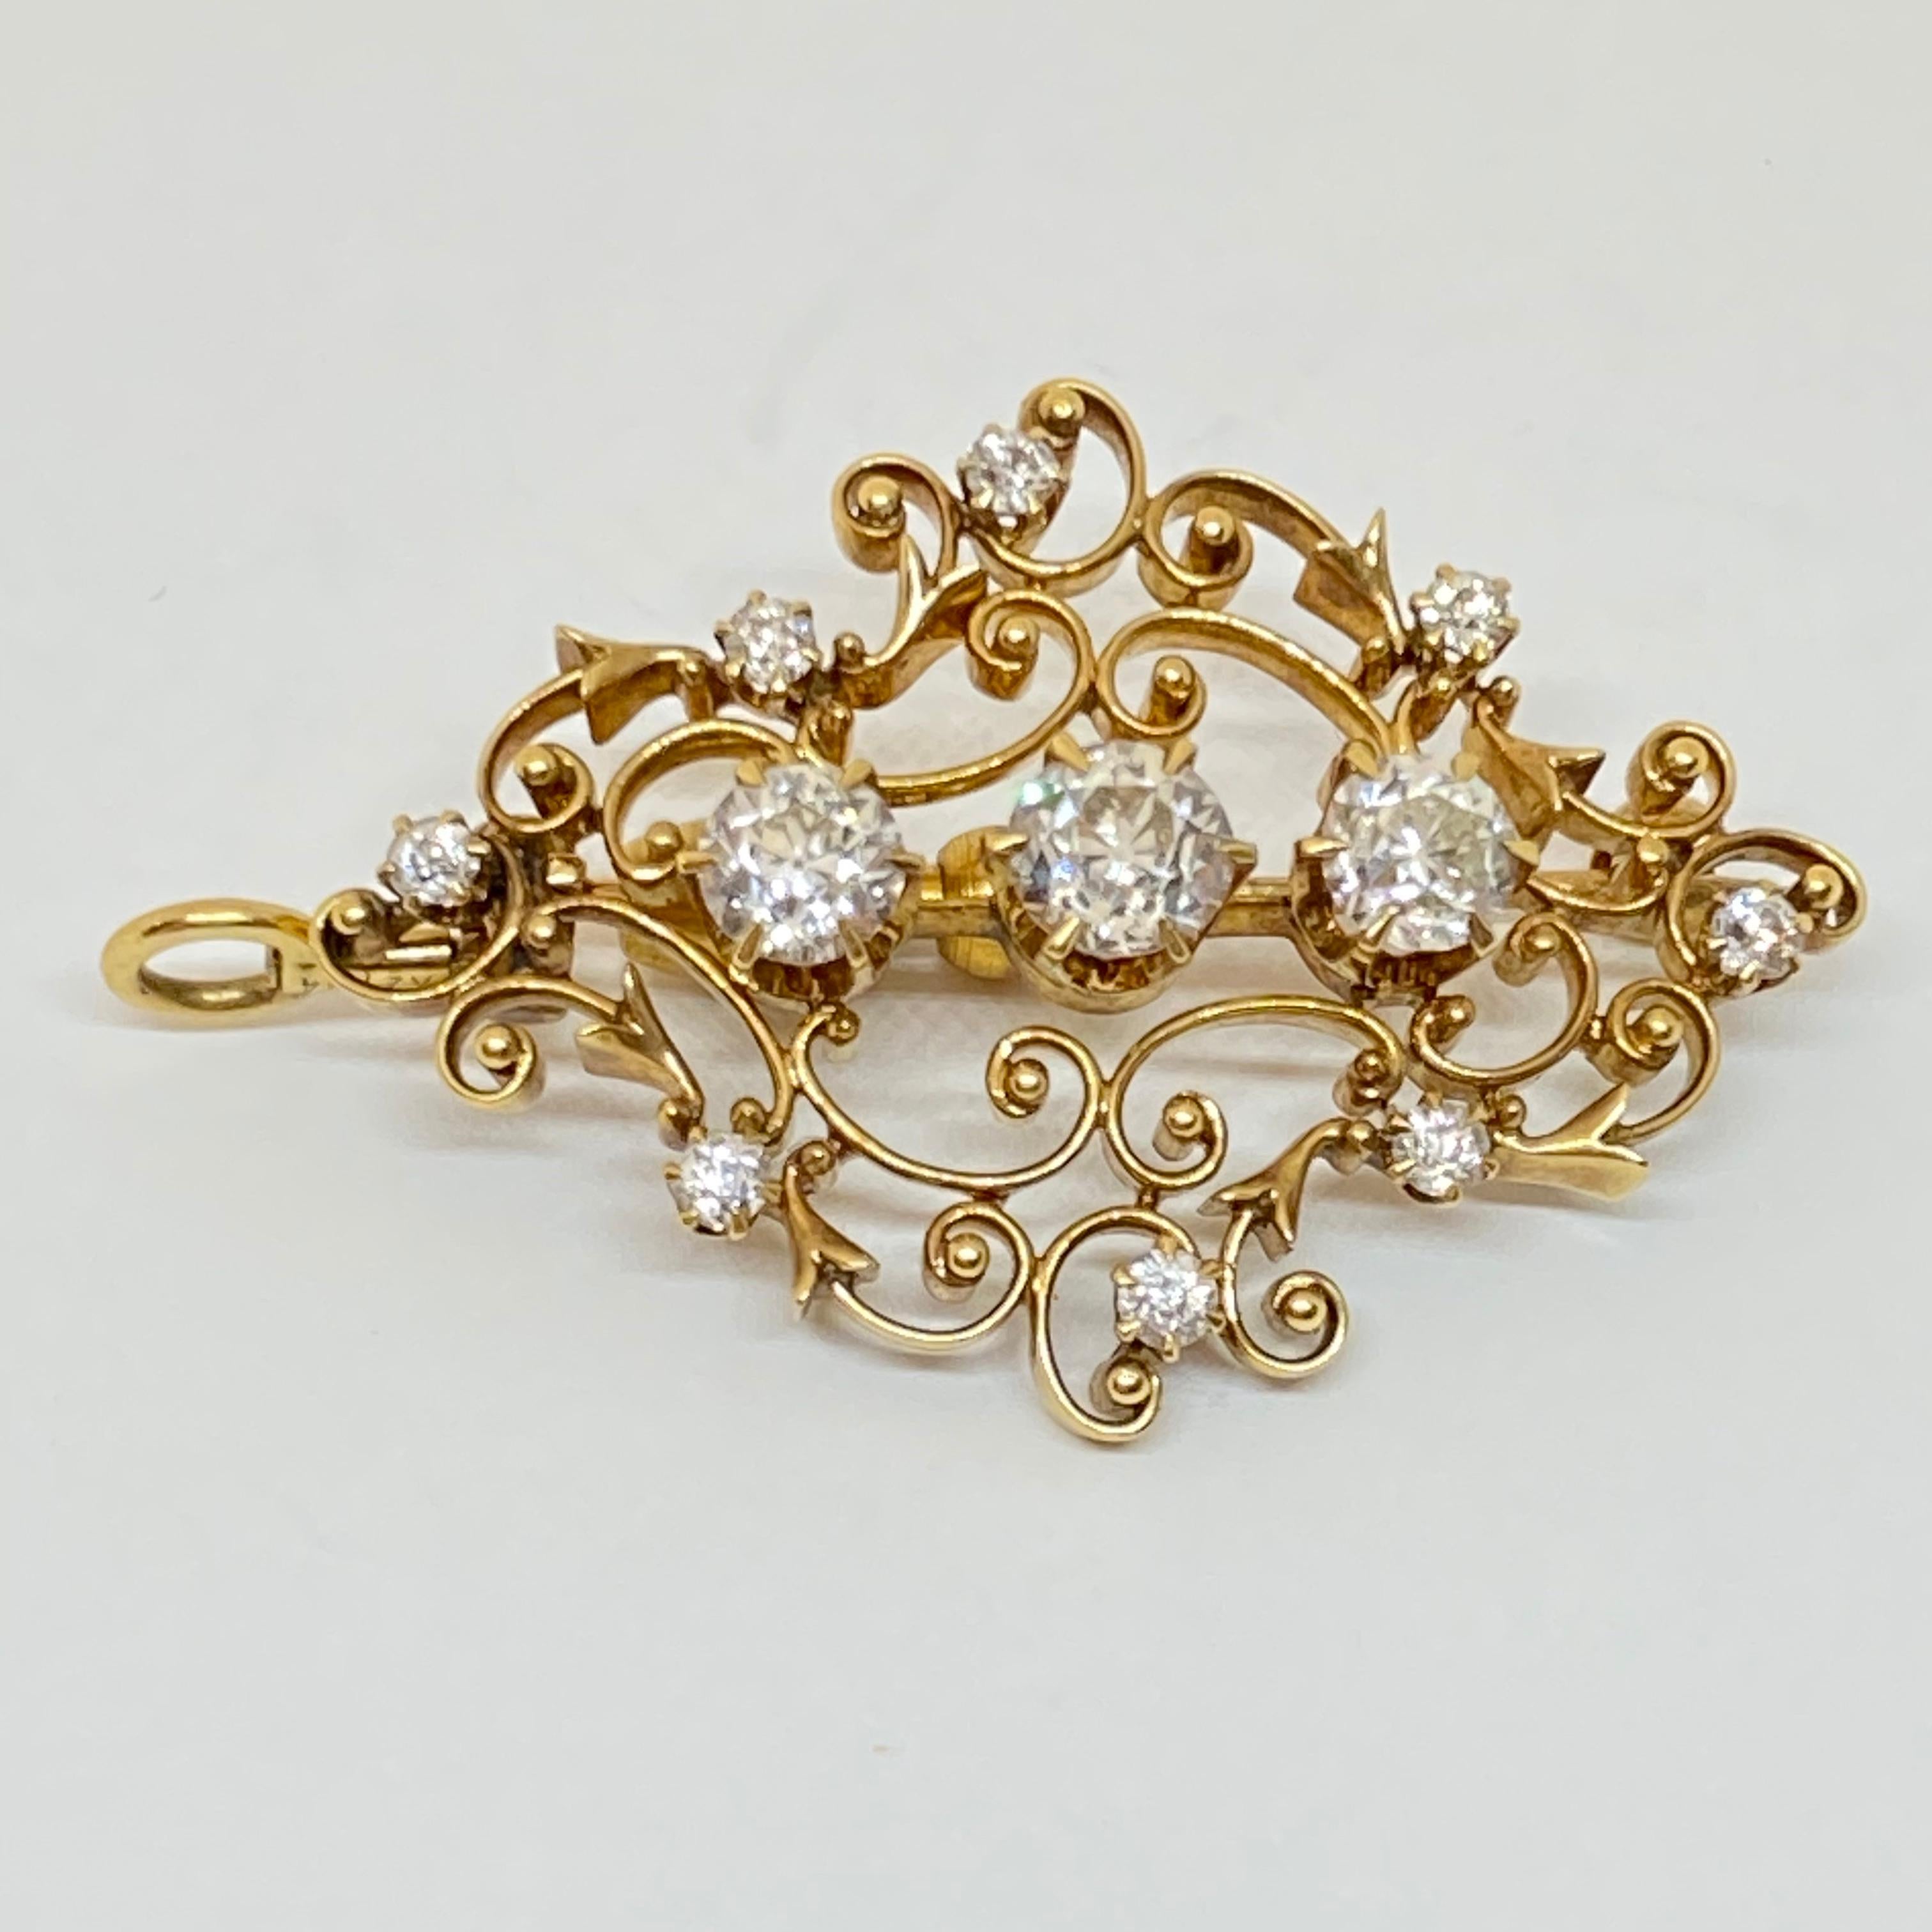 This elegant estate brooch is fashioned from 18K yellow gold. The brooch is a delicate scroll design. There are three old European cut diamonds set in six-prong heads. There are eight additional old European cut diamonds scattered around the brooch